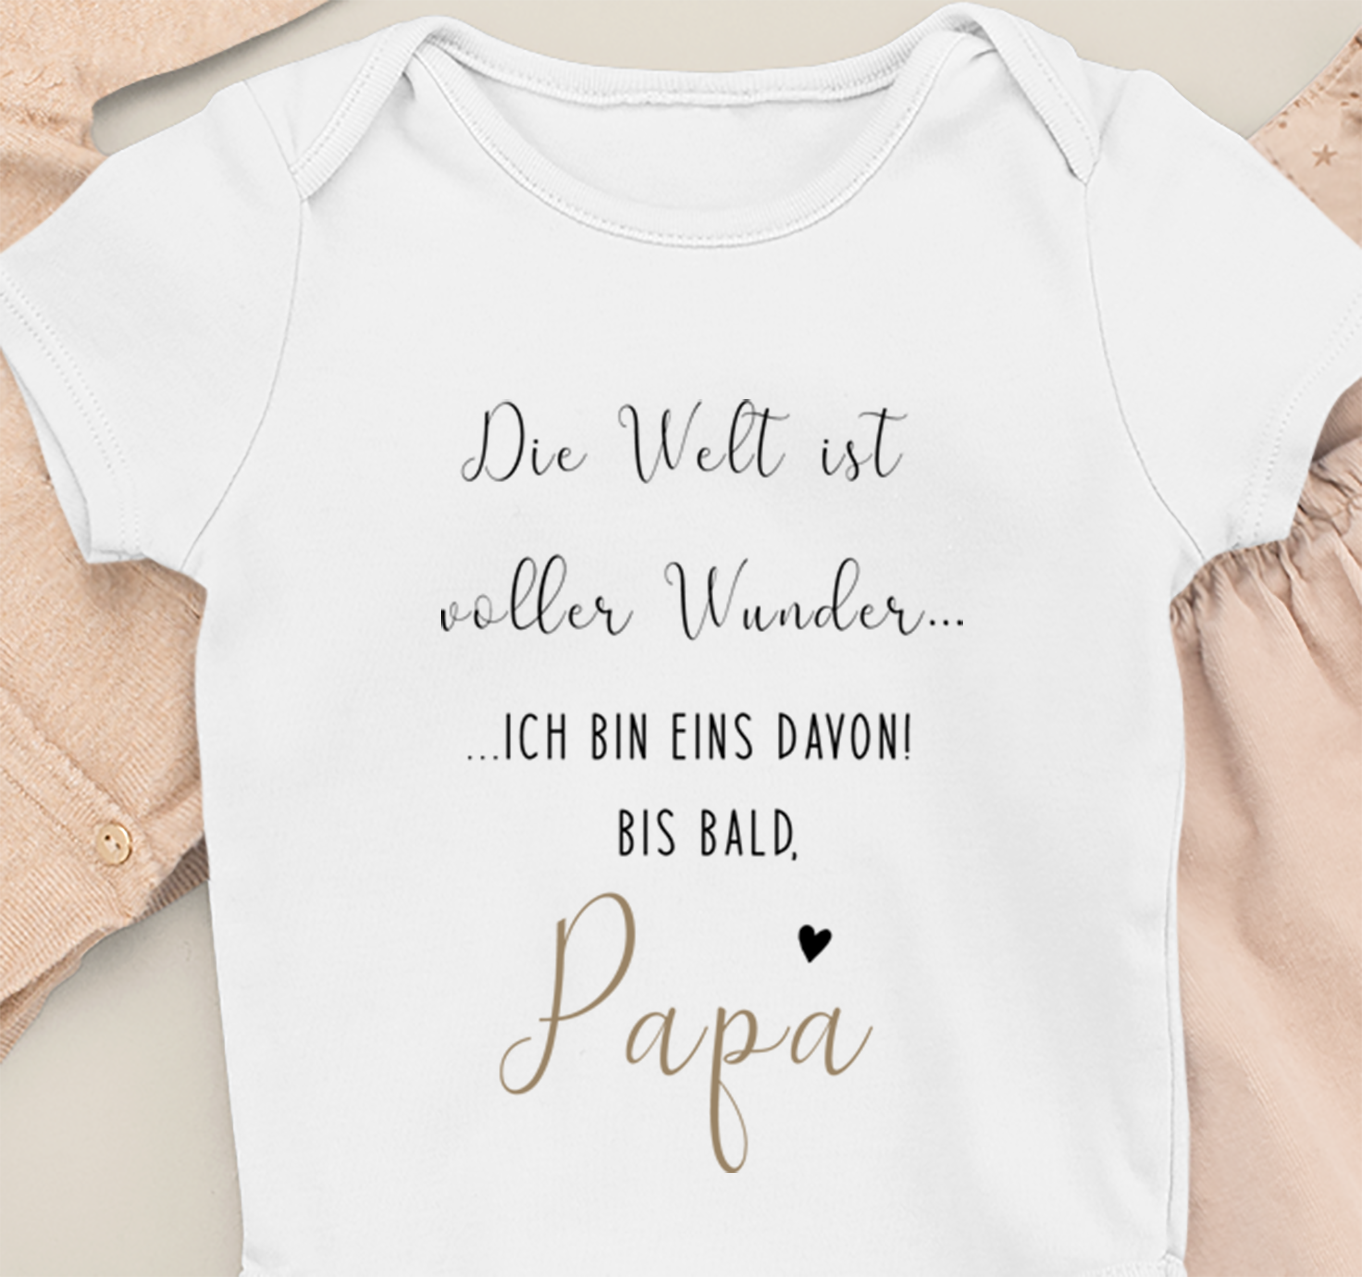 The world is full of wonders... see you soon dad! - Organic baby body white